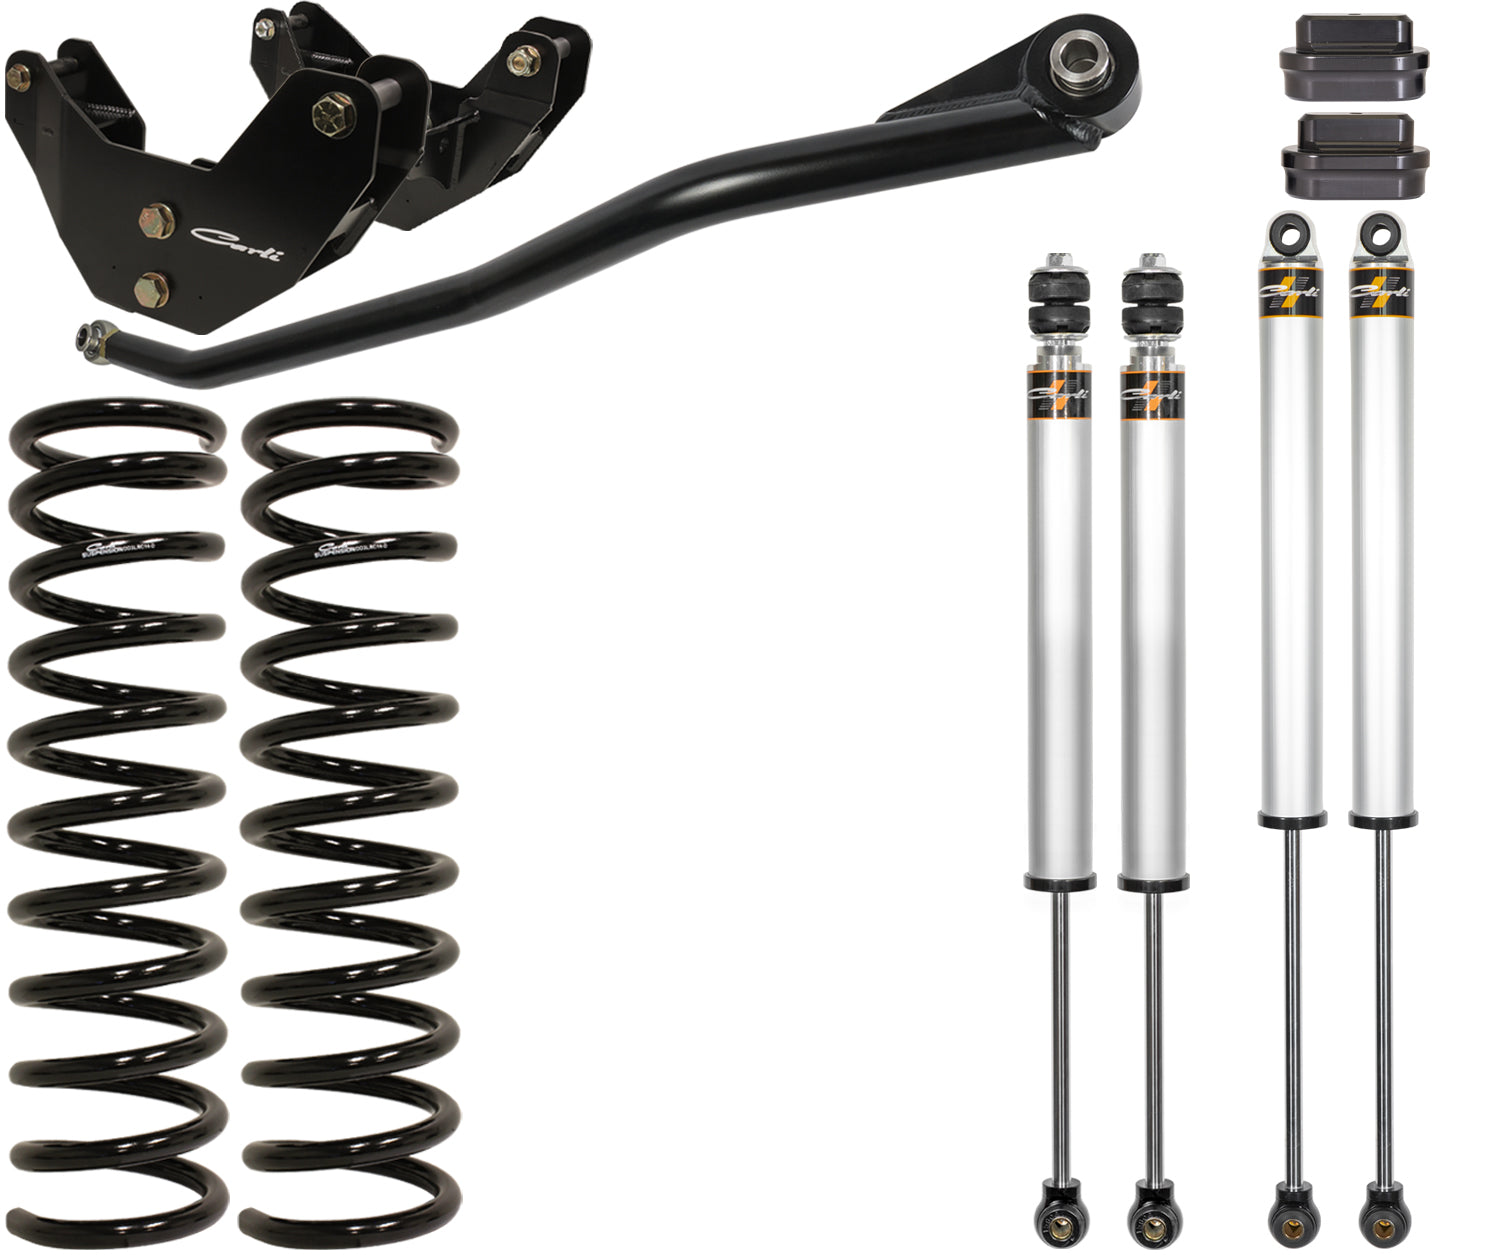 Carli Suspension 3.25" Commuter System Suspension Package